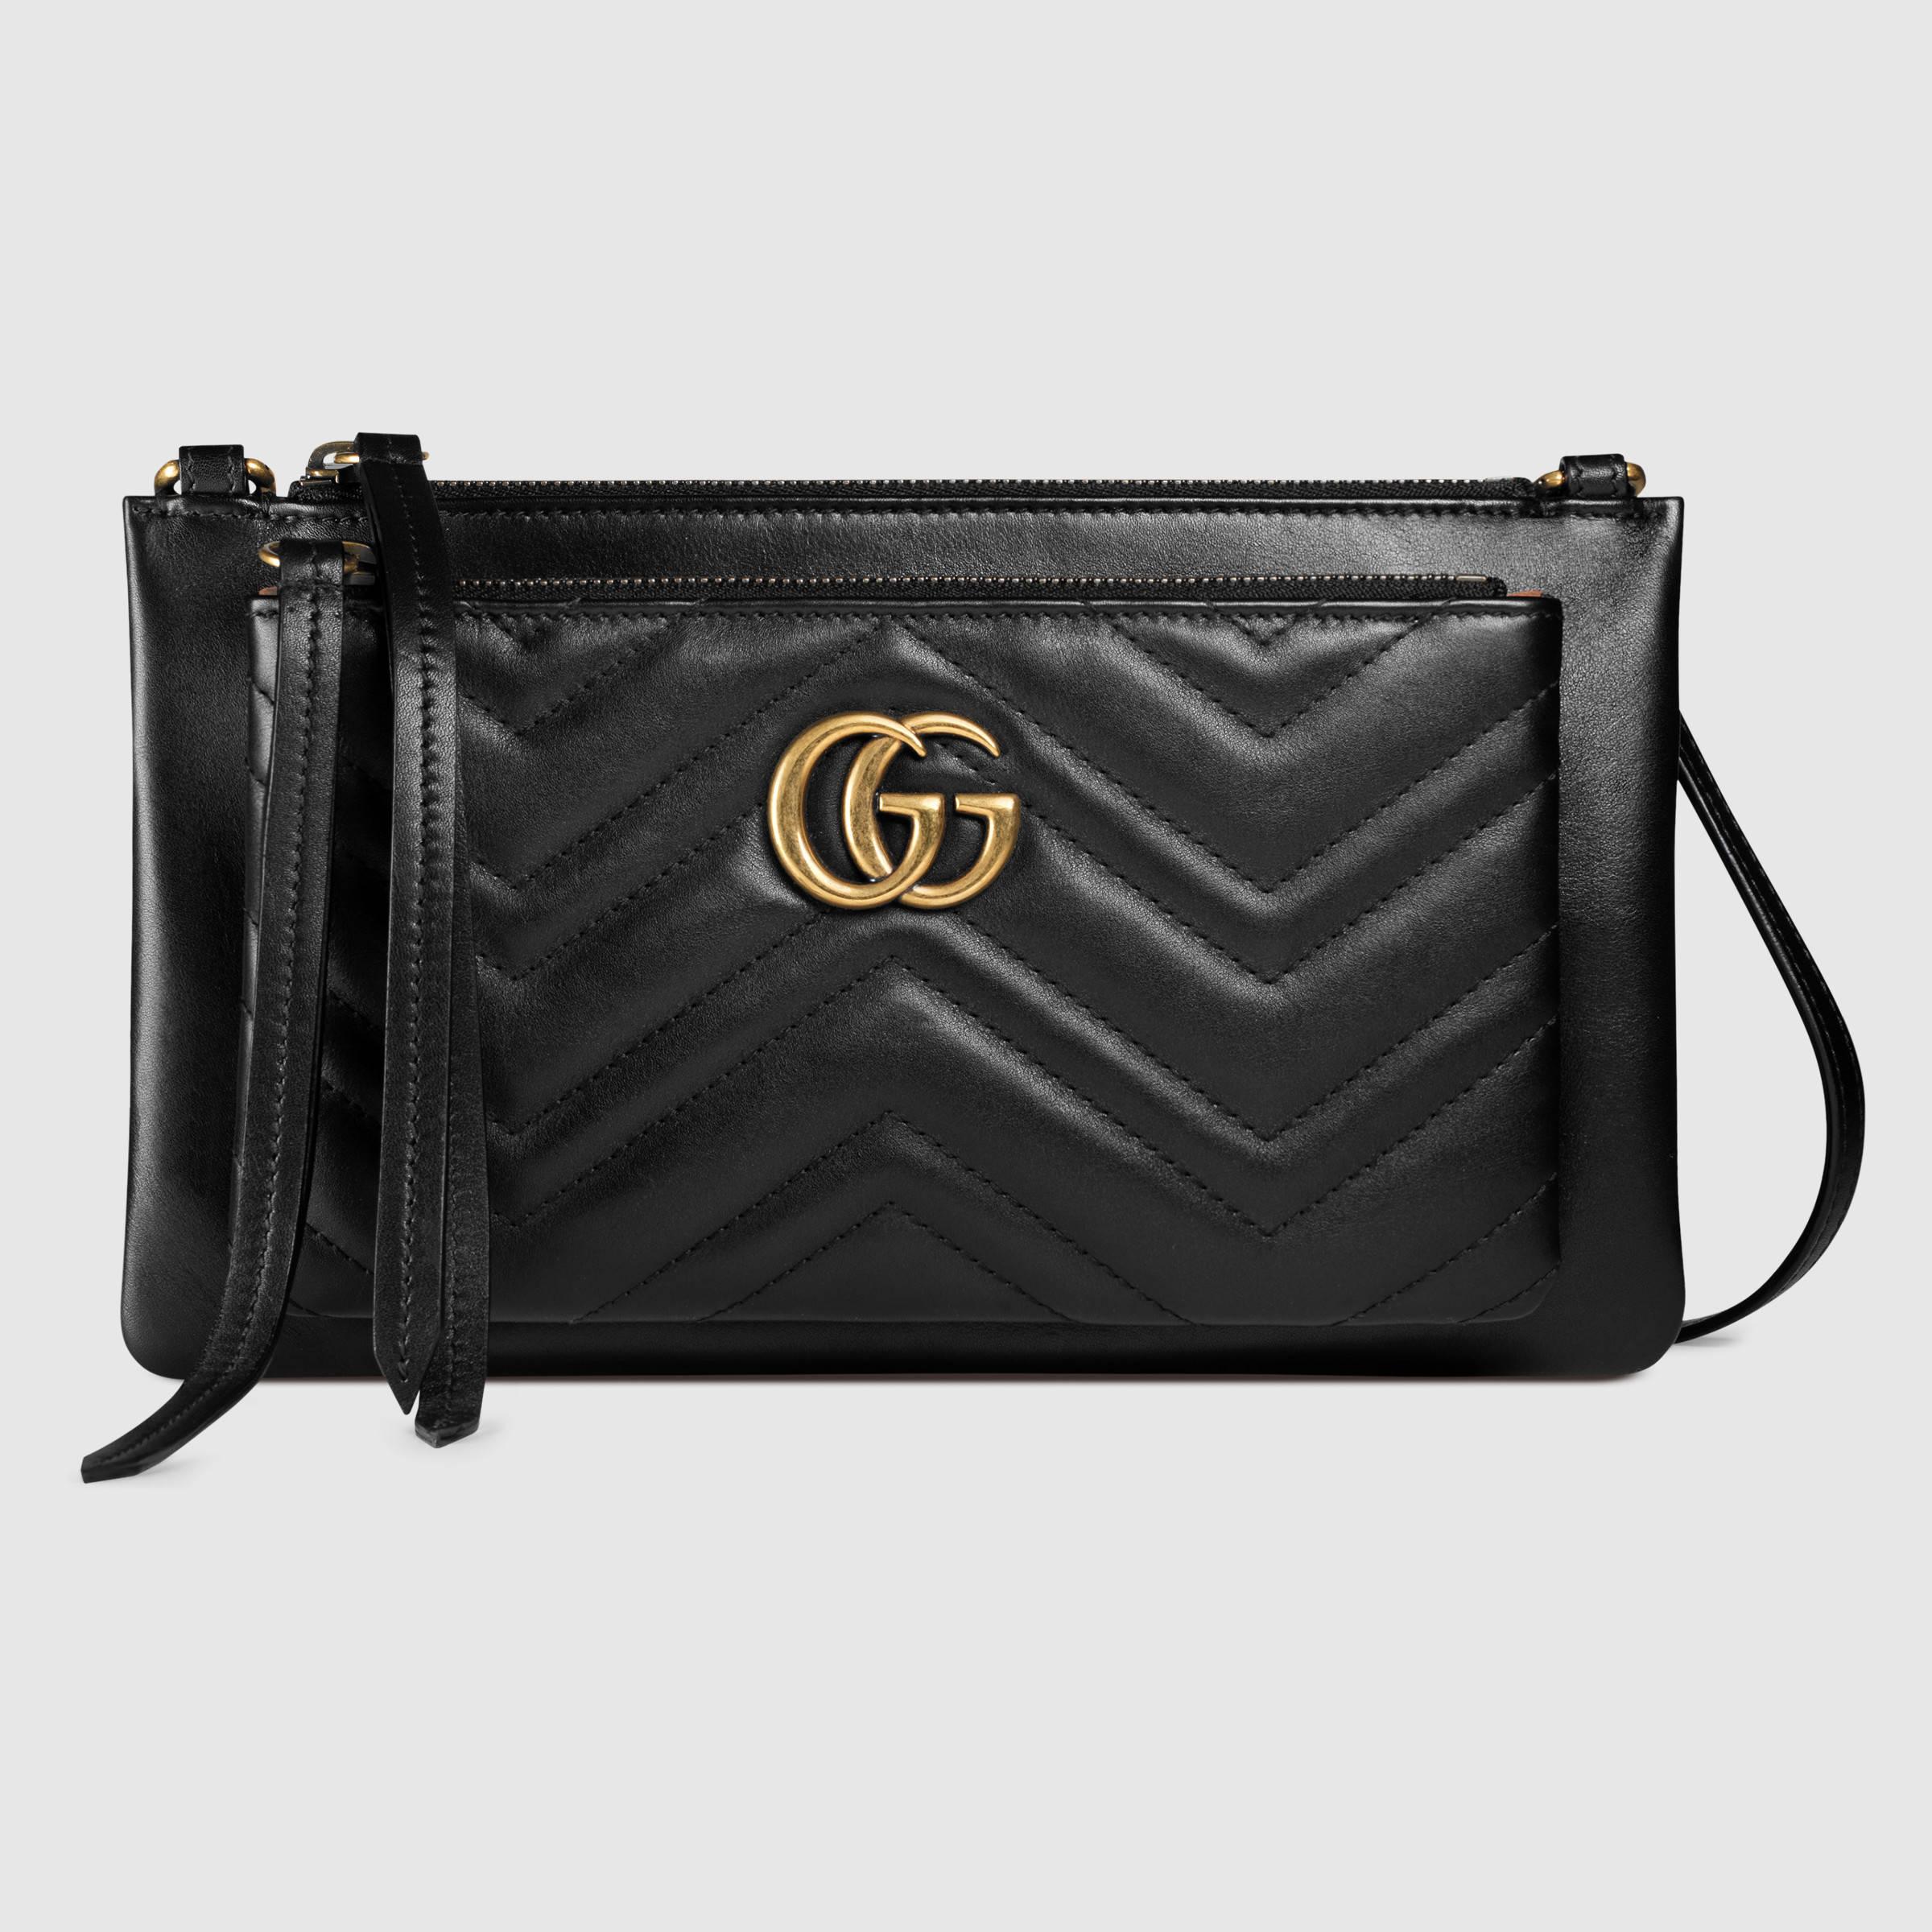 Gucci GG Marmont Leather Shoulder Bag in Black | Lyst